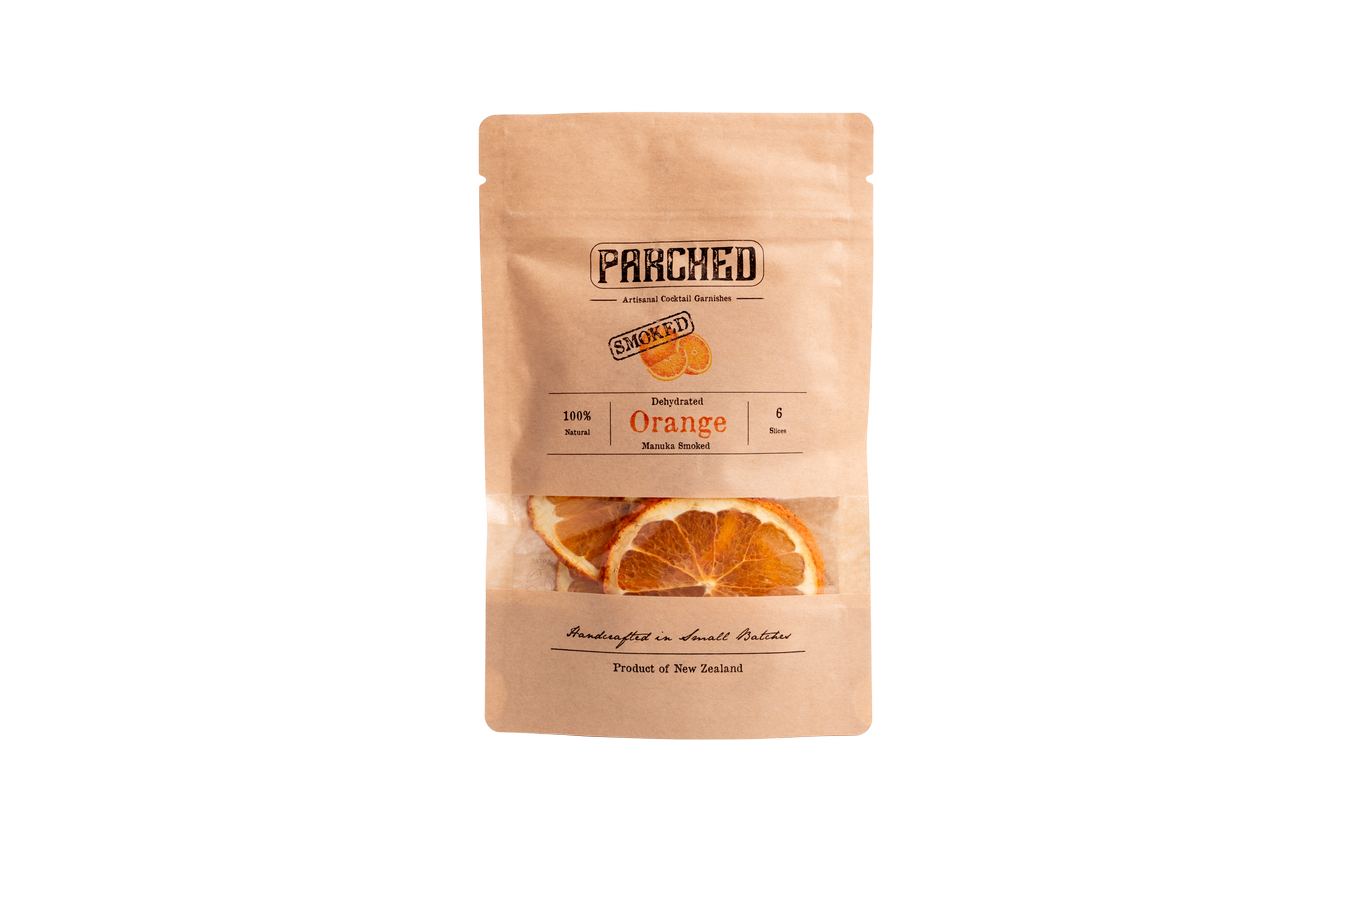 Smoked Orange - Parched